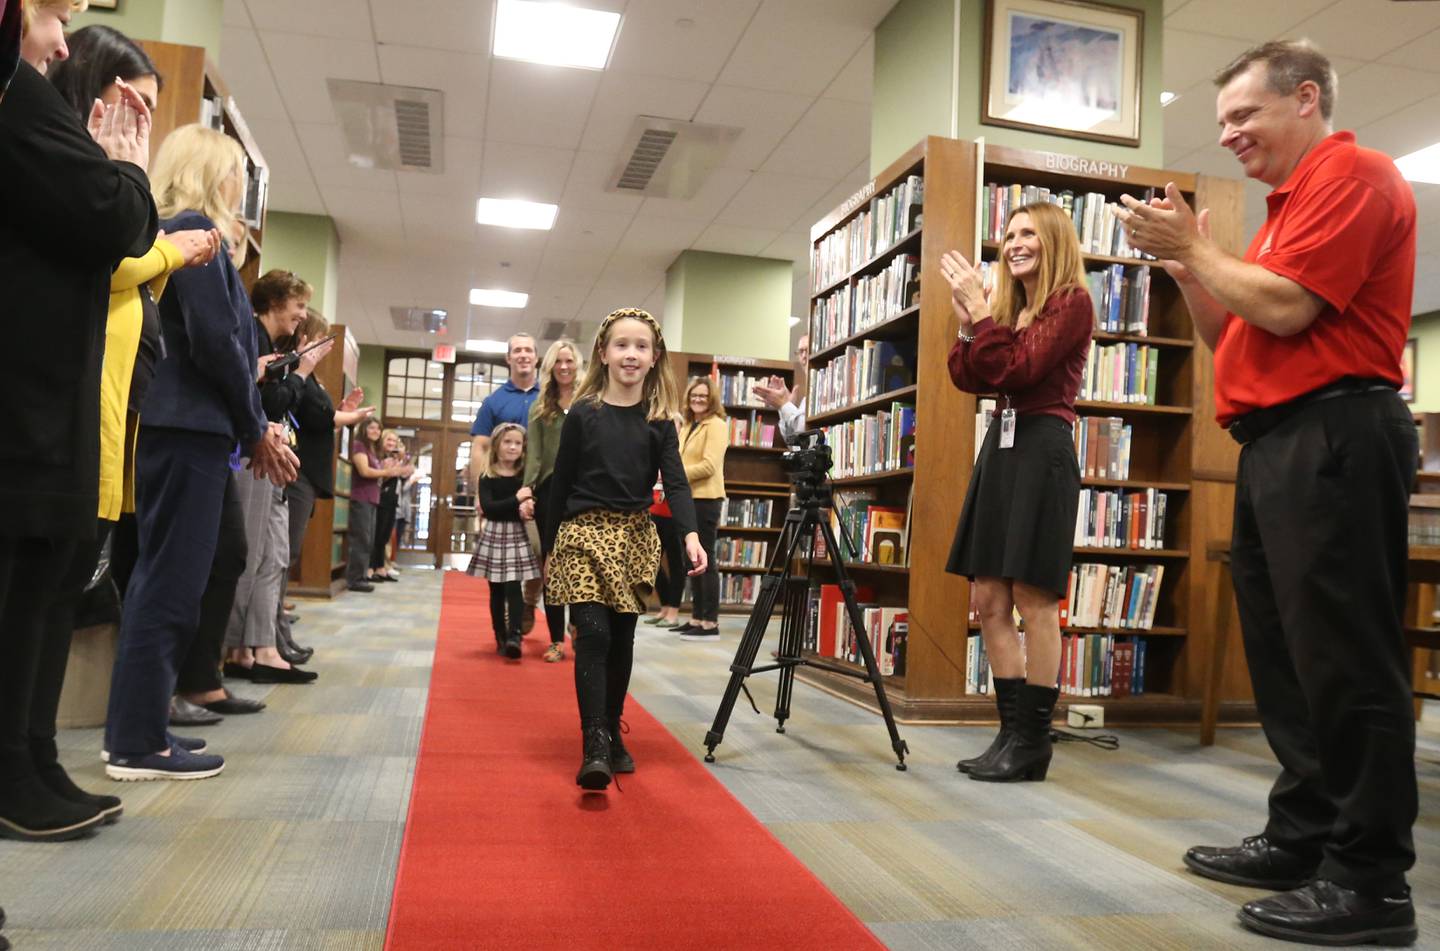 Author Reese Carney 8, of Utica walks down a red carpet with her father Pat, mother Emily and sister Avery, in McCormack Memorial Library to release her new book titled "Reeses Fantastic Surgery Adventure" on Monday, Nov. 6, 2023 at La Salle-Peru Township High School.